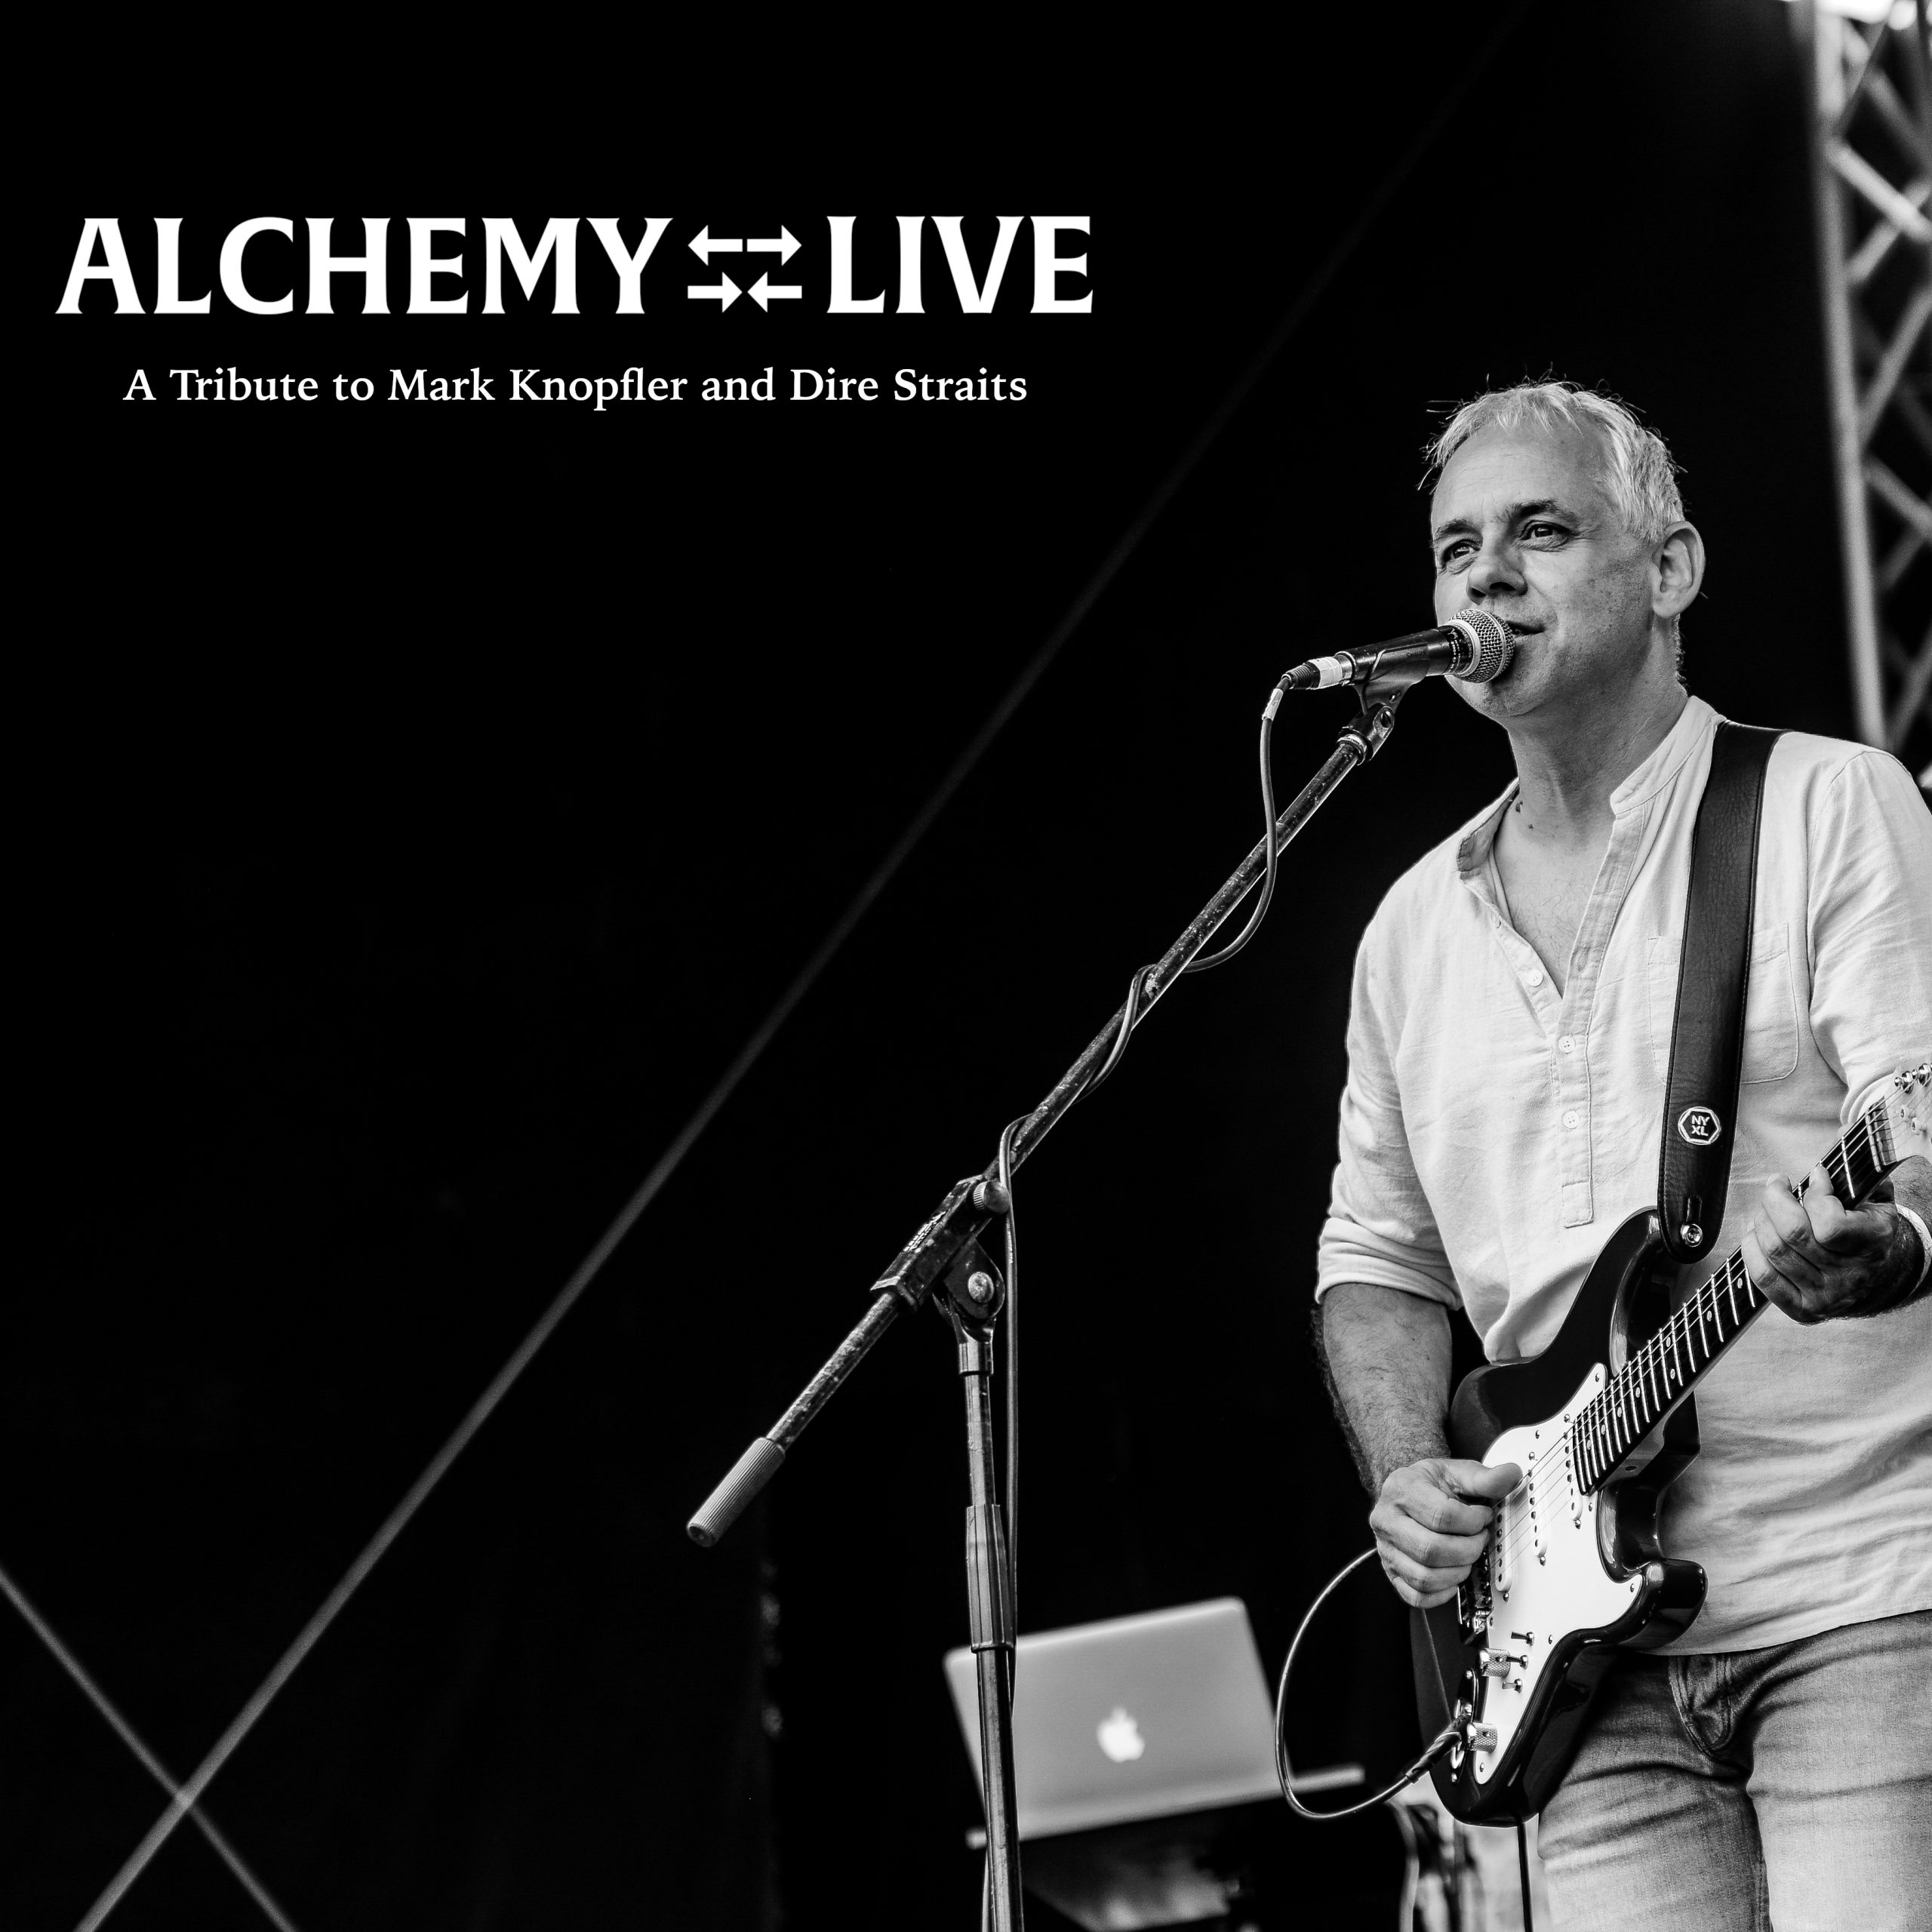 Alchemy Live – a tribute to Mark Knopfler and Dire Straits